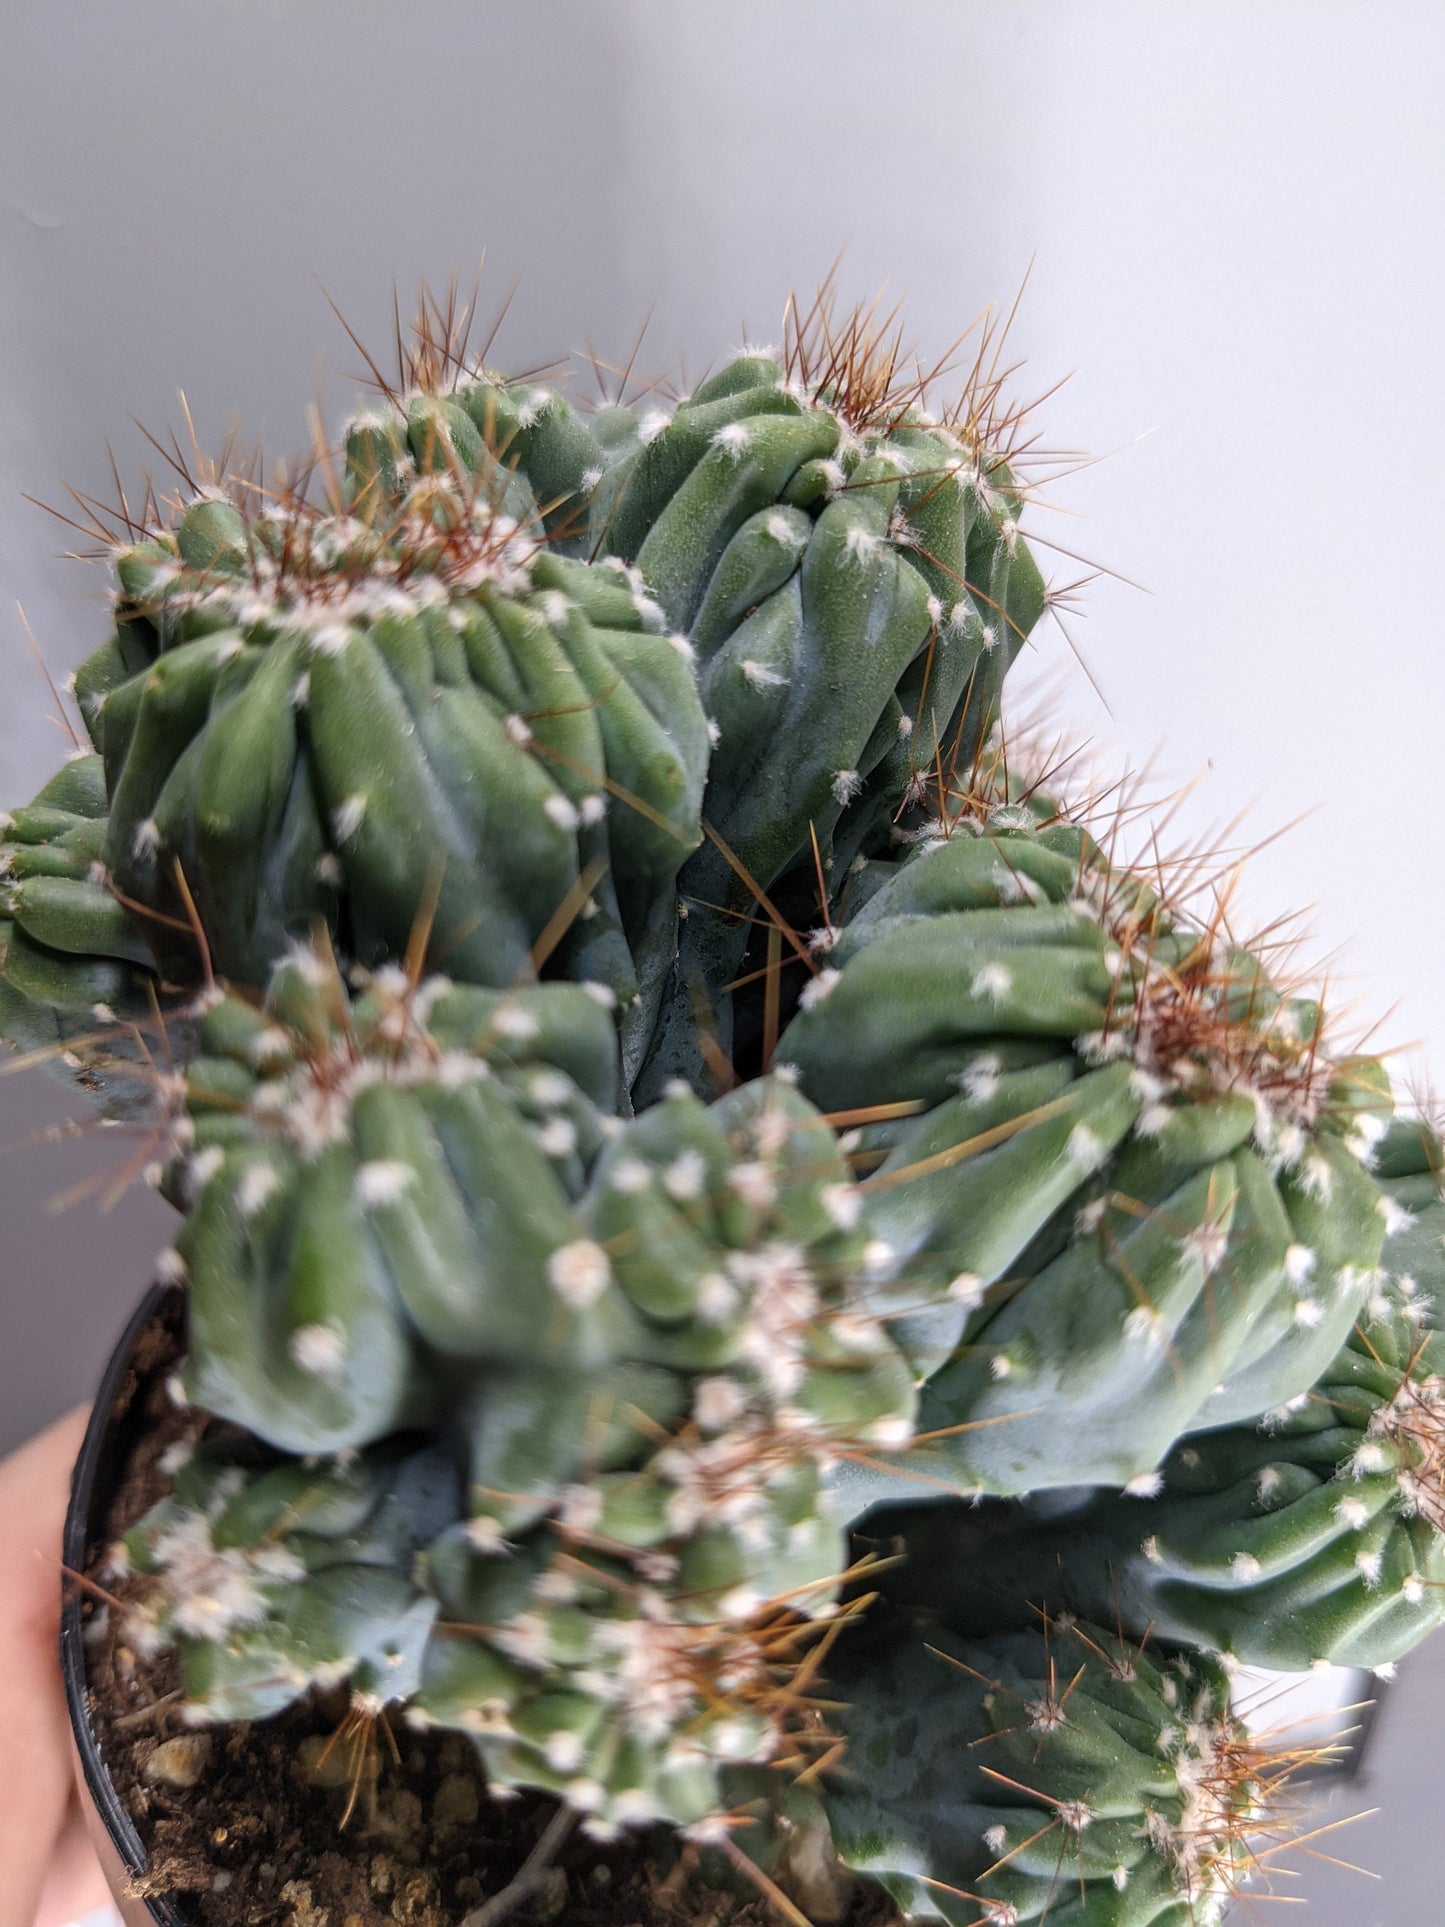 Ming Thing Crested Blue Cactus 4" Pot Size Crested RARE Cactus Living Plant